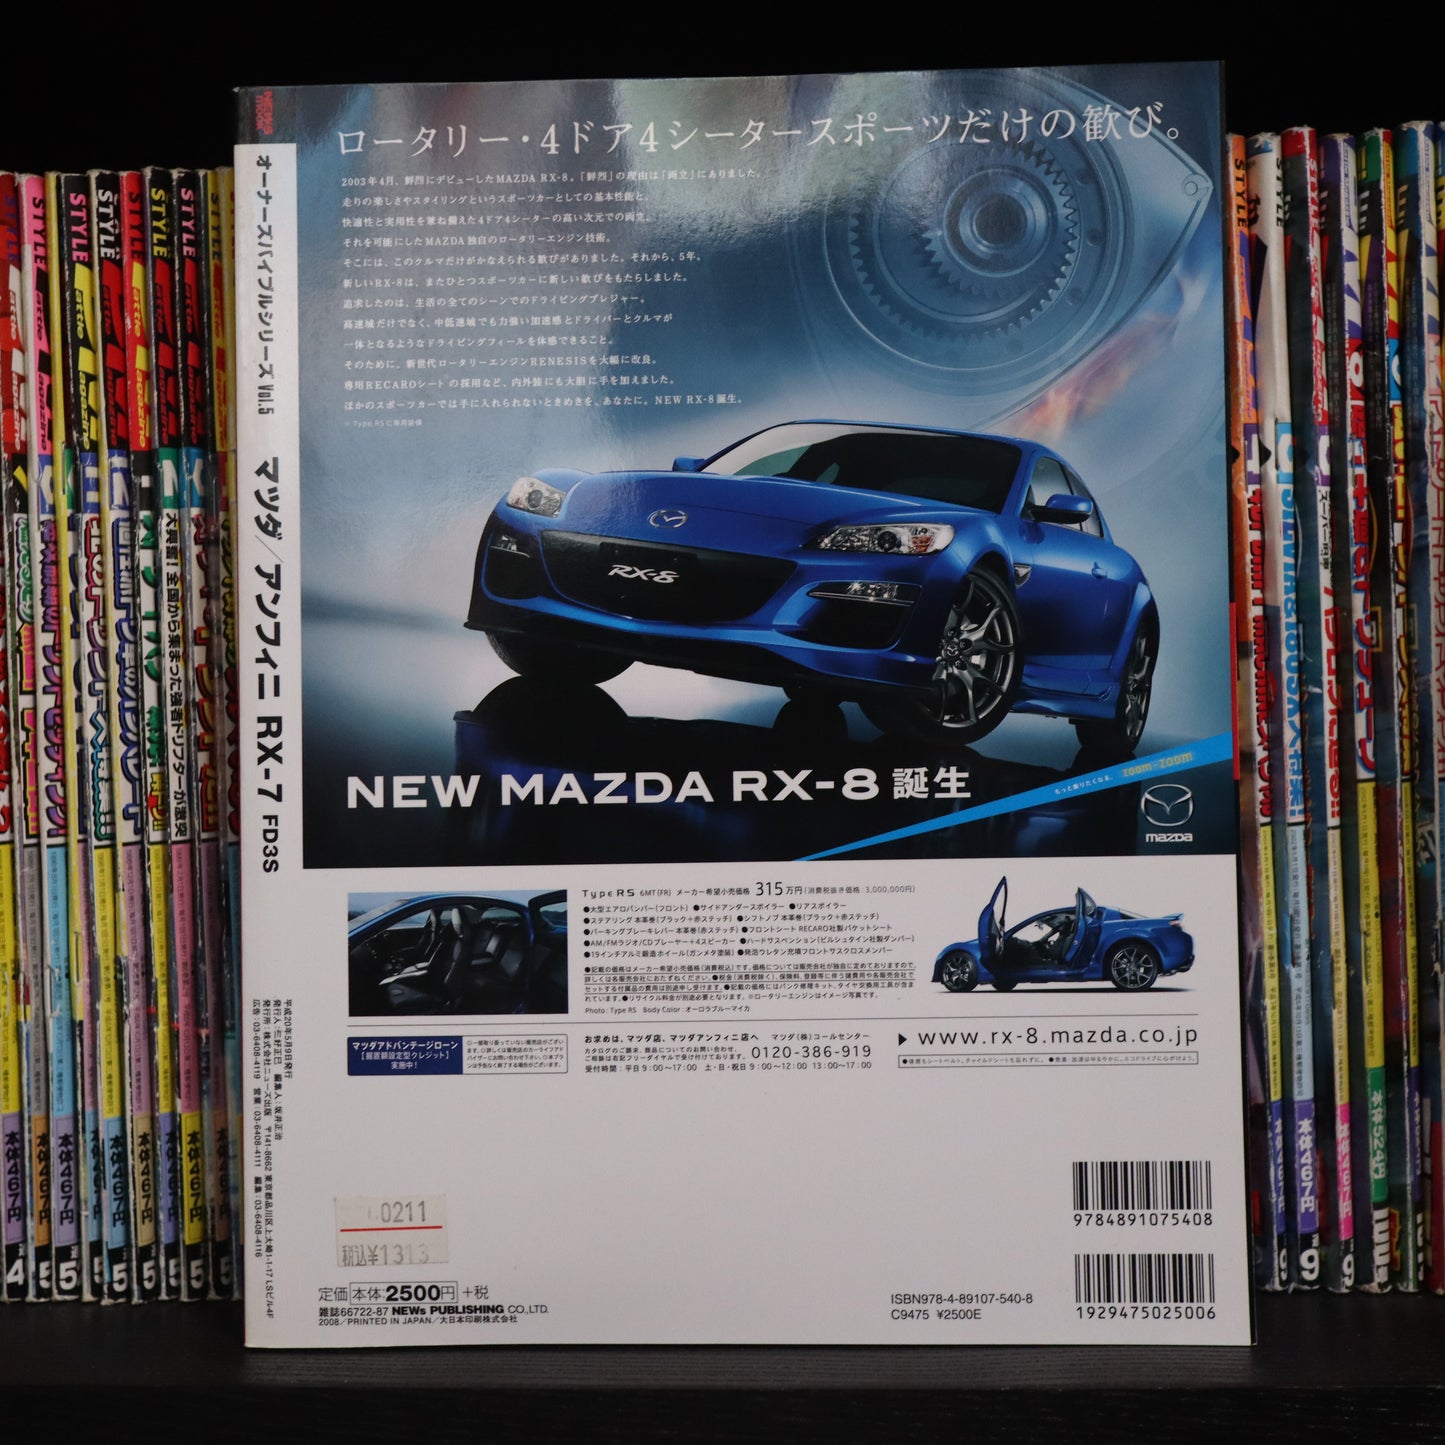 Mazda RX7 FD3S Owners Bible vol. 005